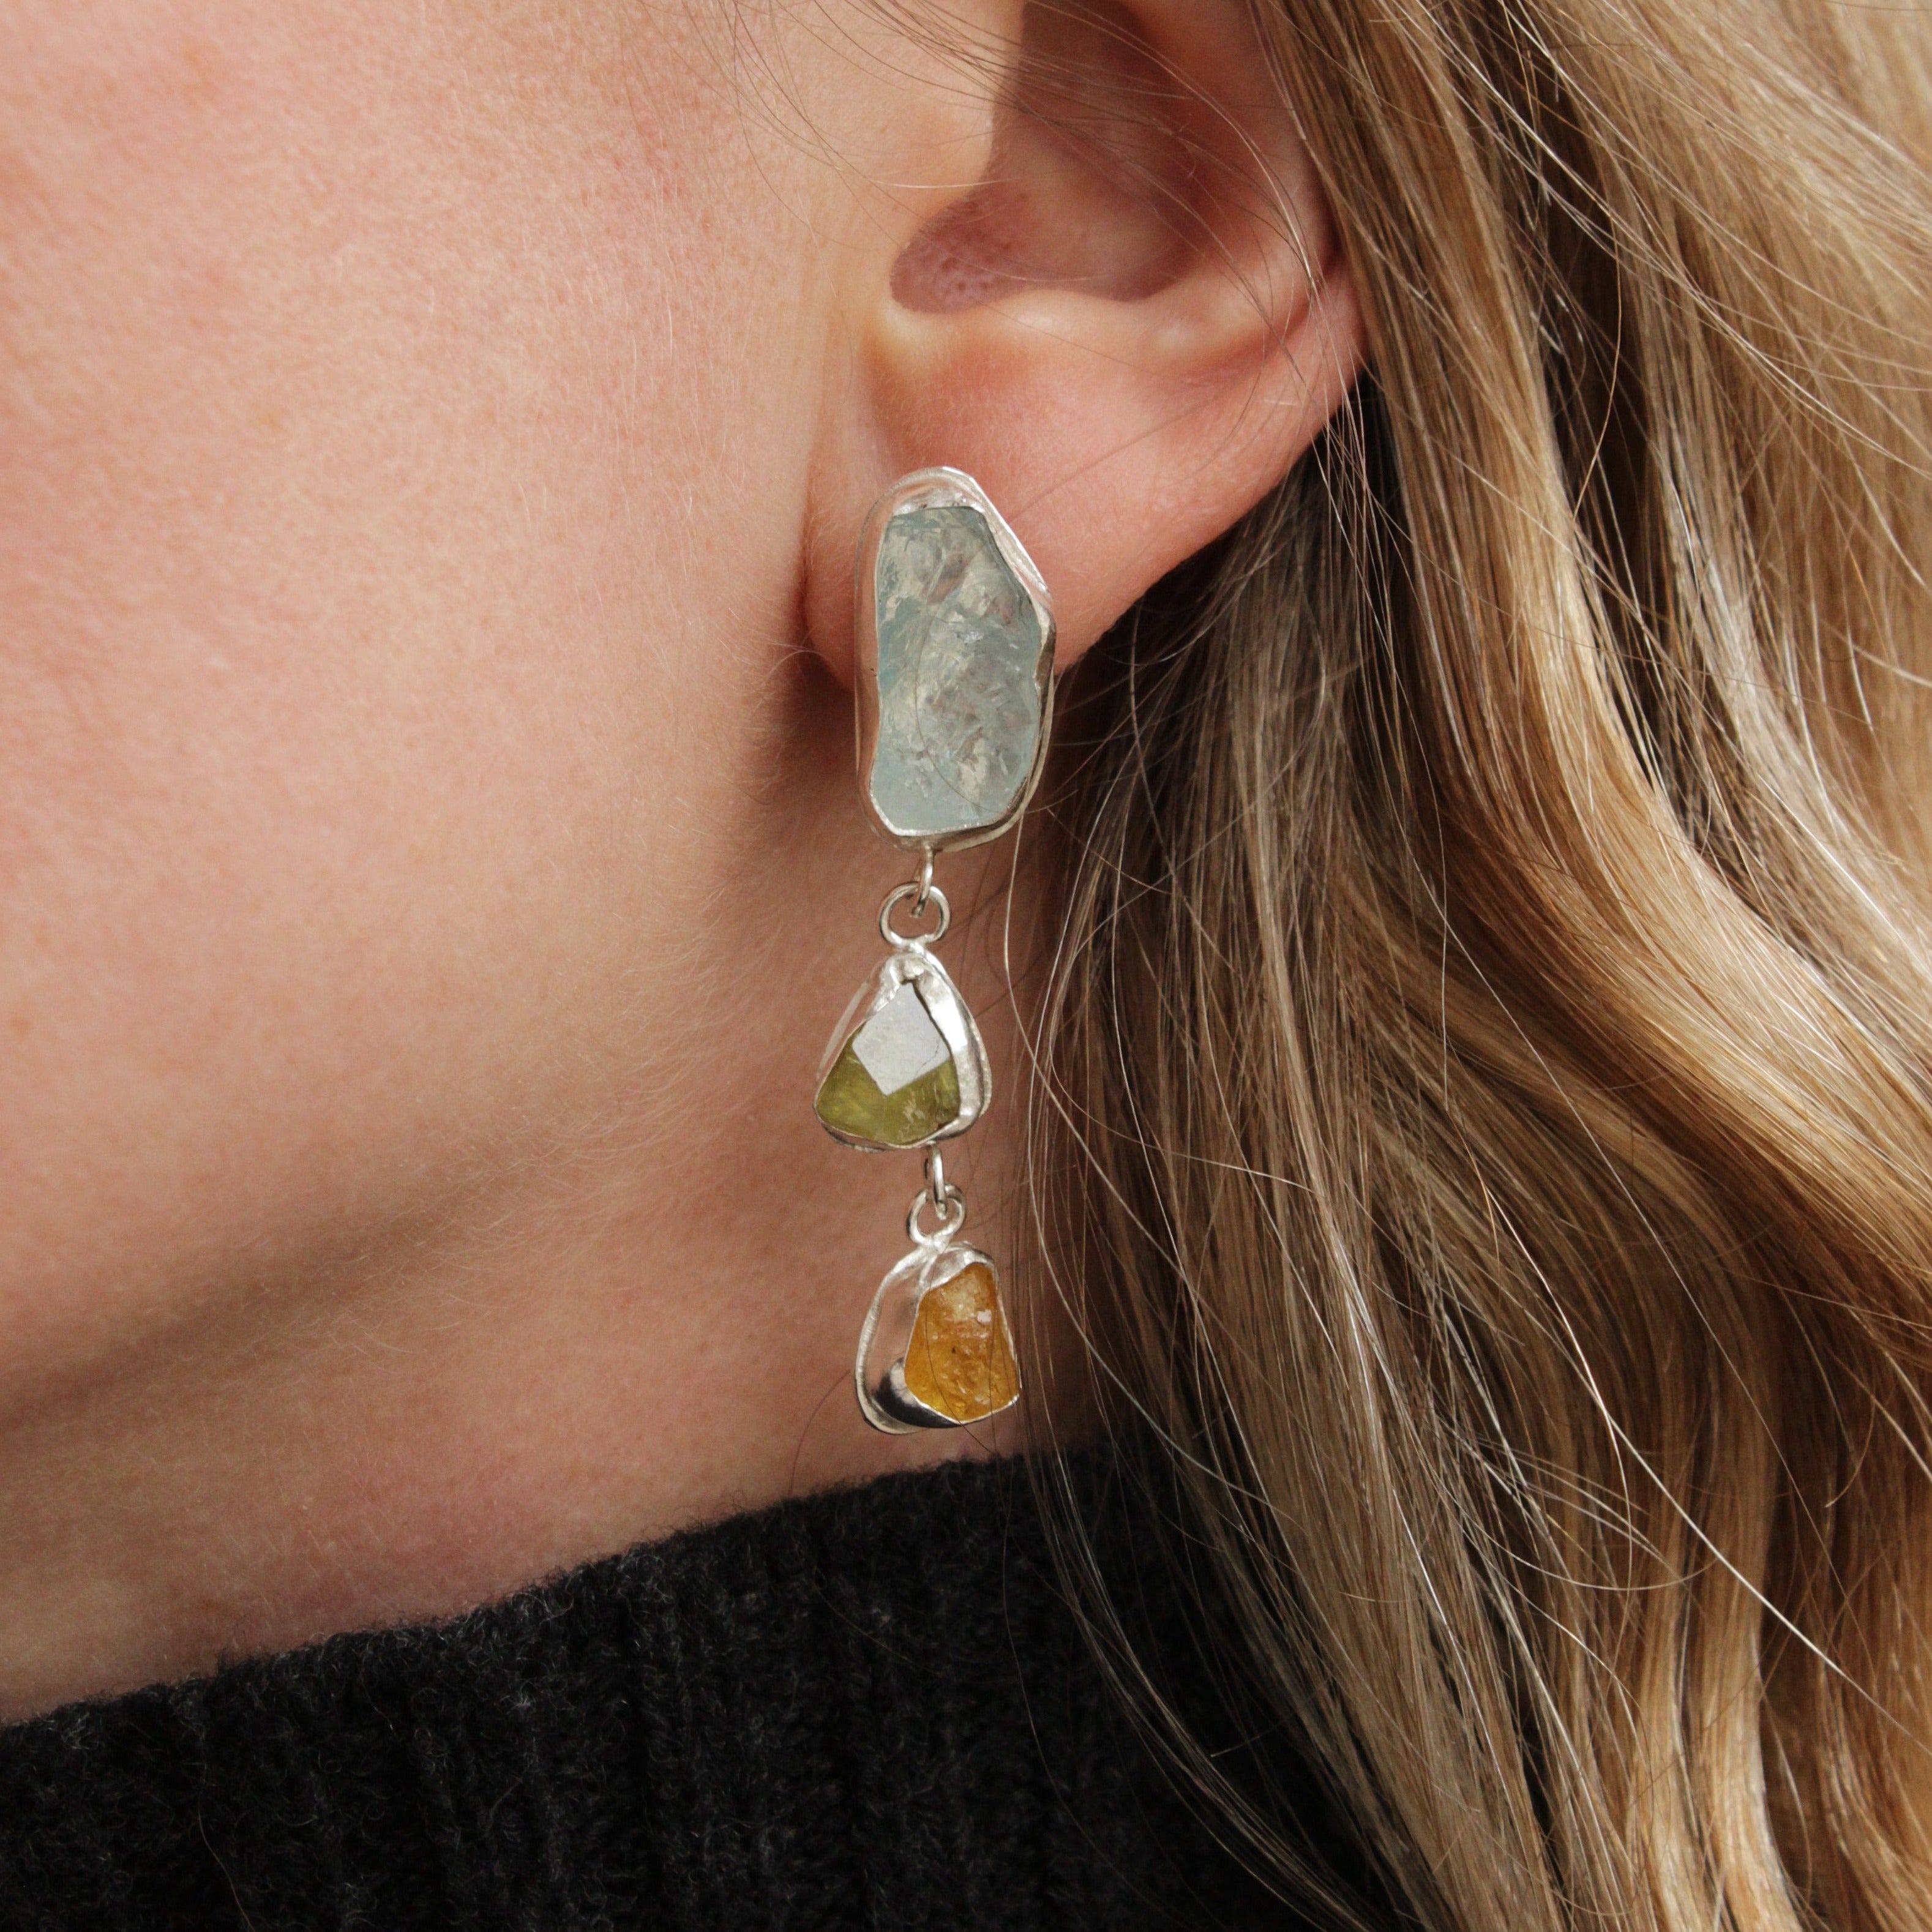 These stunning, one-of-a-kind earrings feature raw Aquamarine, Sphene and Golden Beryl stones. Each one encourages protection, abundance and promotes a healthy life.